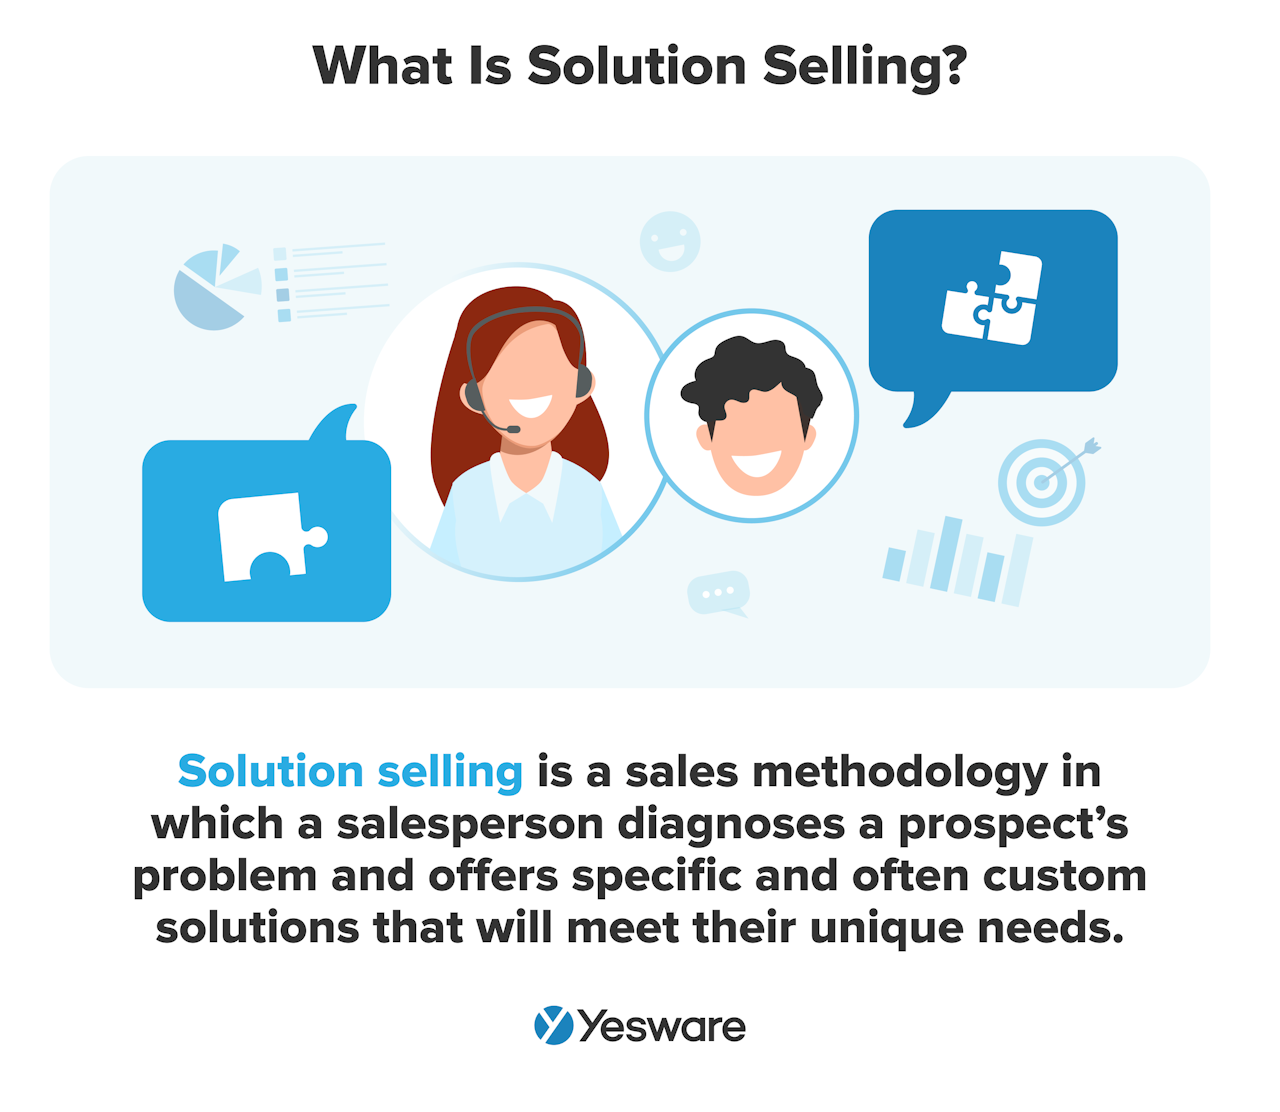 What is solution selling?